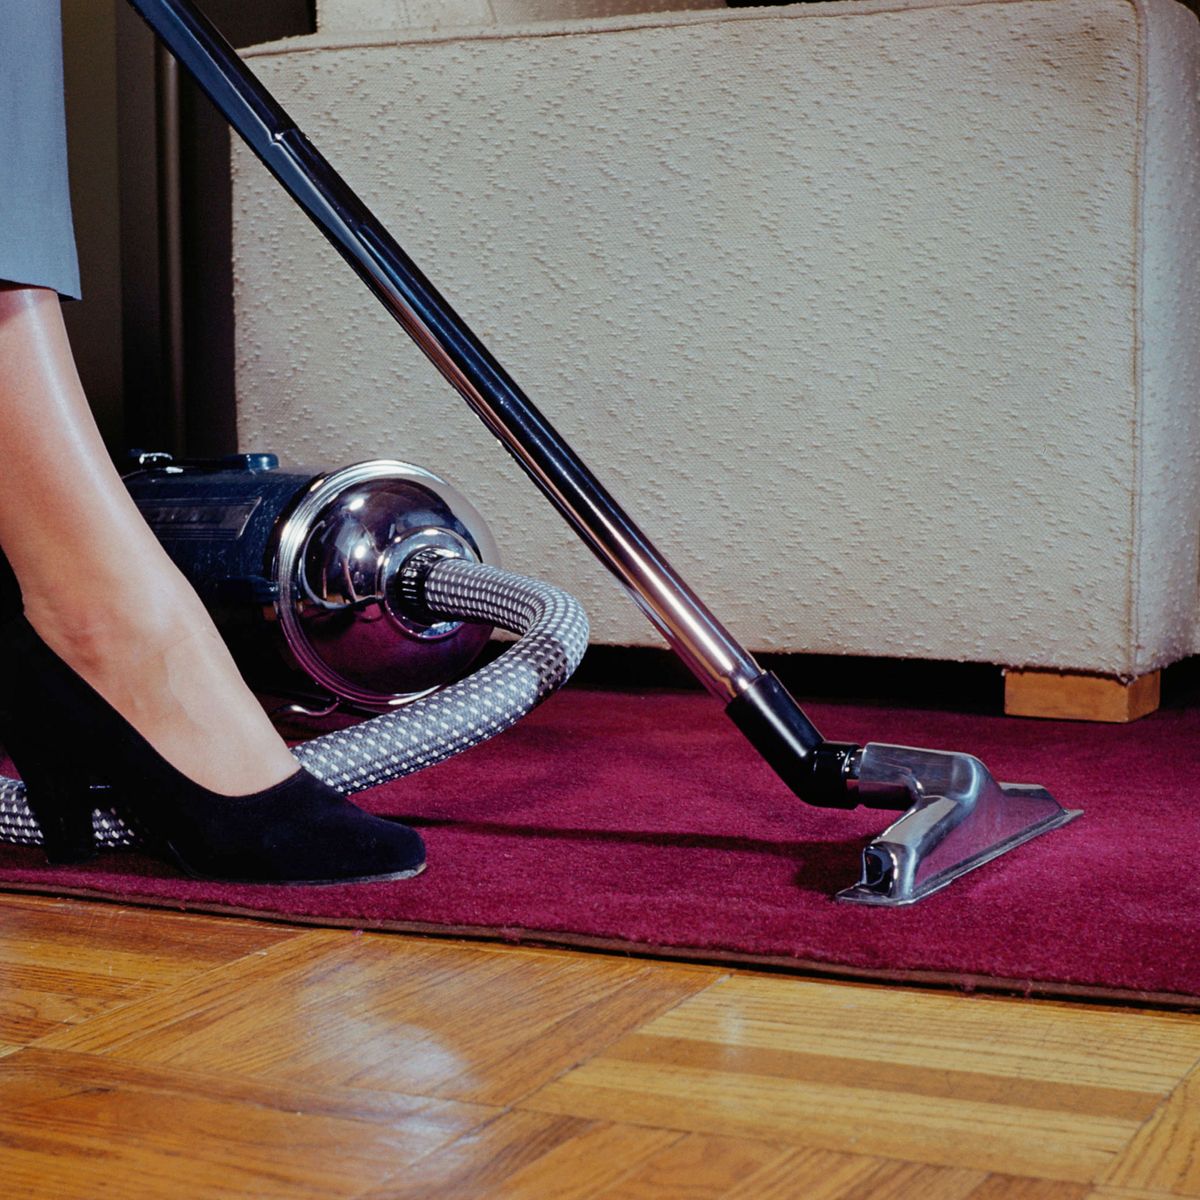 Cleaning Service, Best Type Of Vacuum Cleaner For Laminate Floors